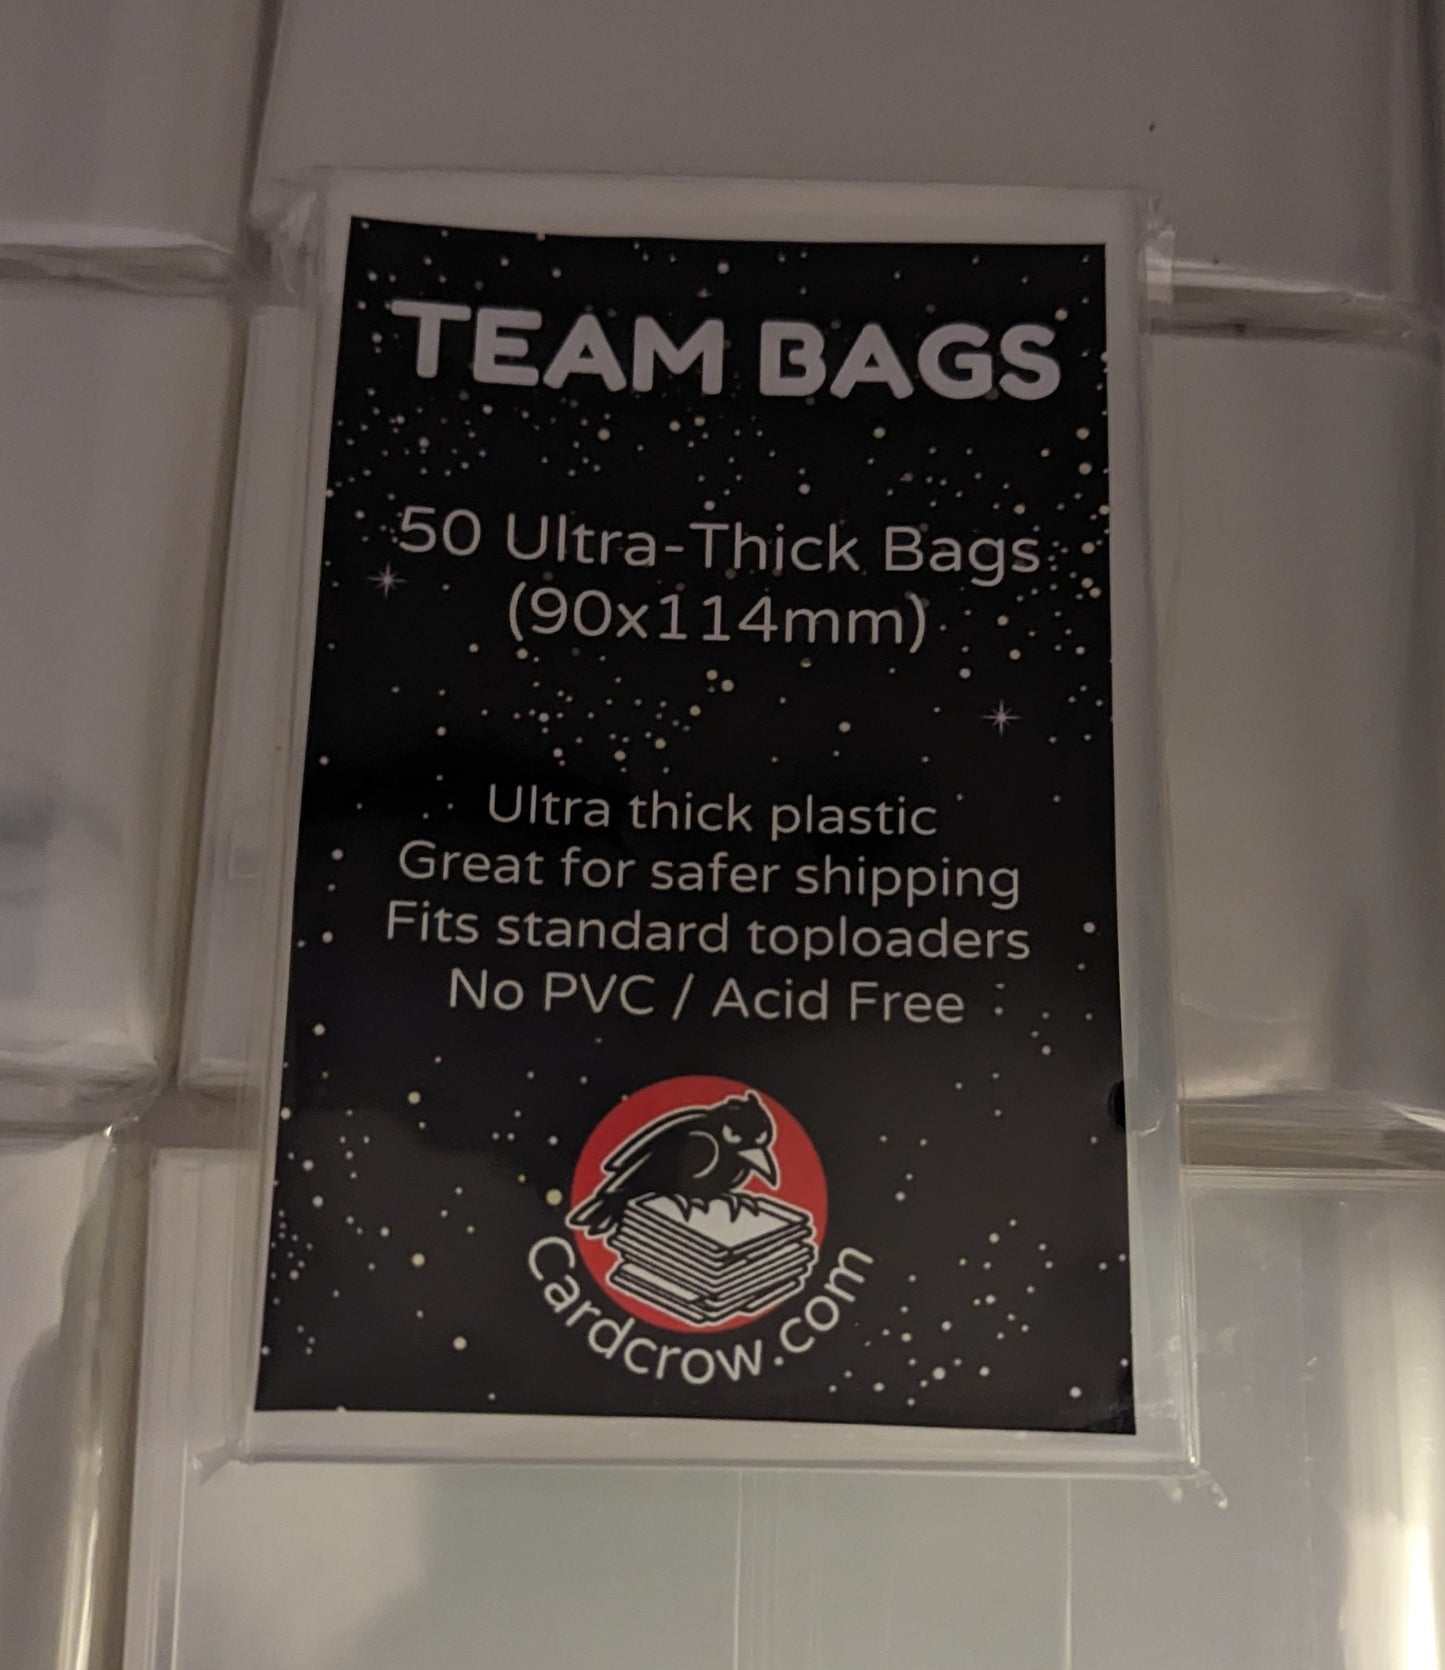 50x Ultra Thick Clear Resealable Team Bags